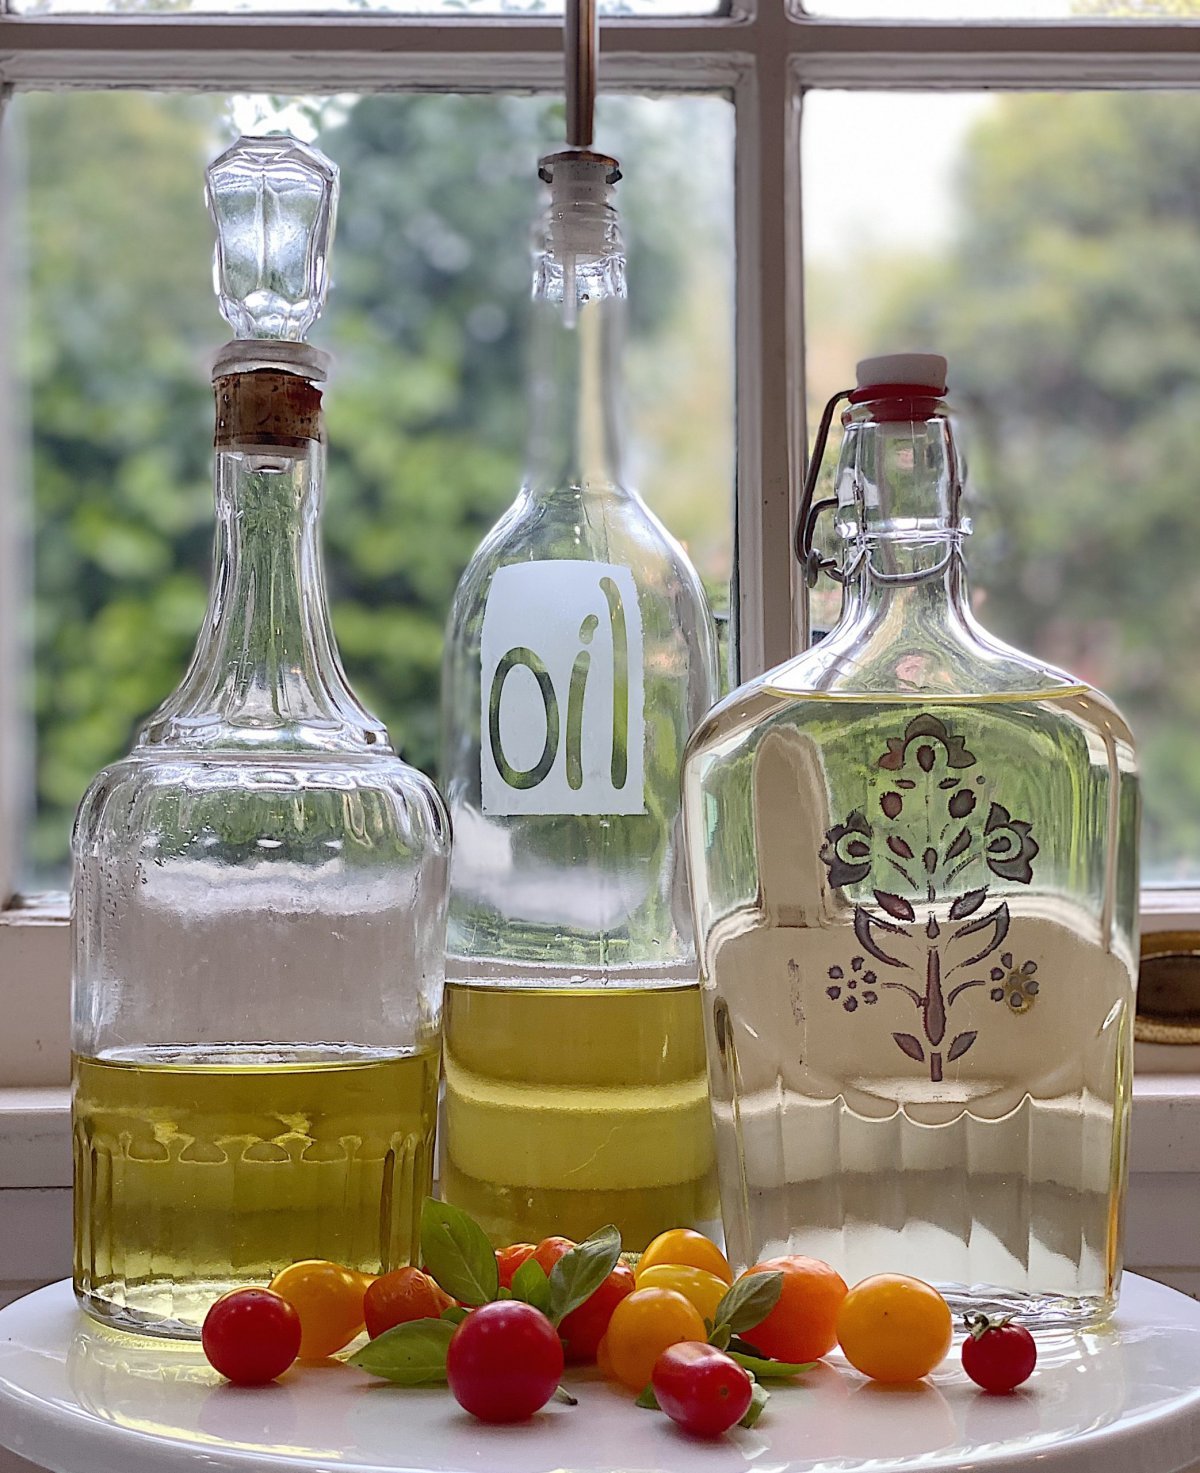 How to Make Decorative Bottles for the Kitchen: 7 Steps